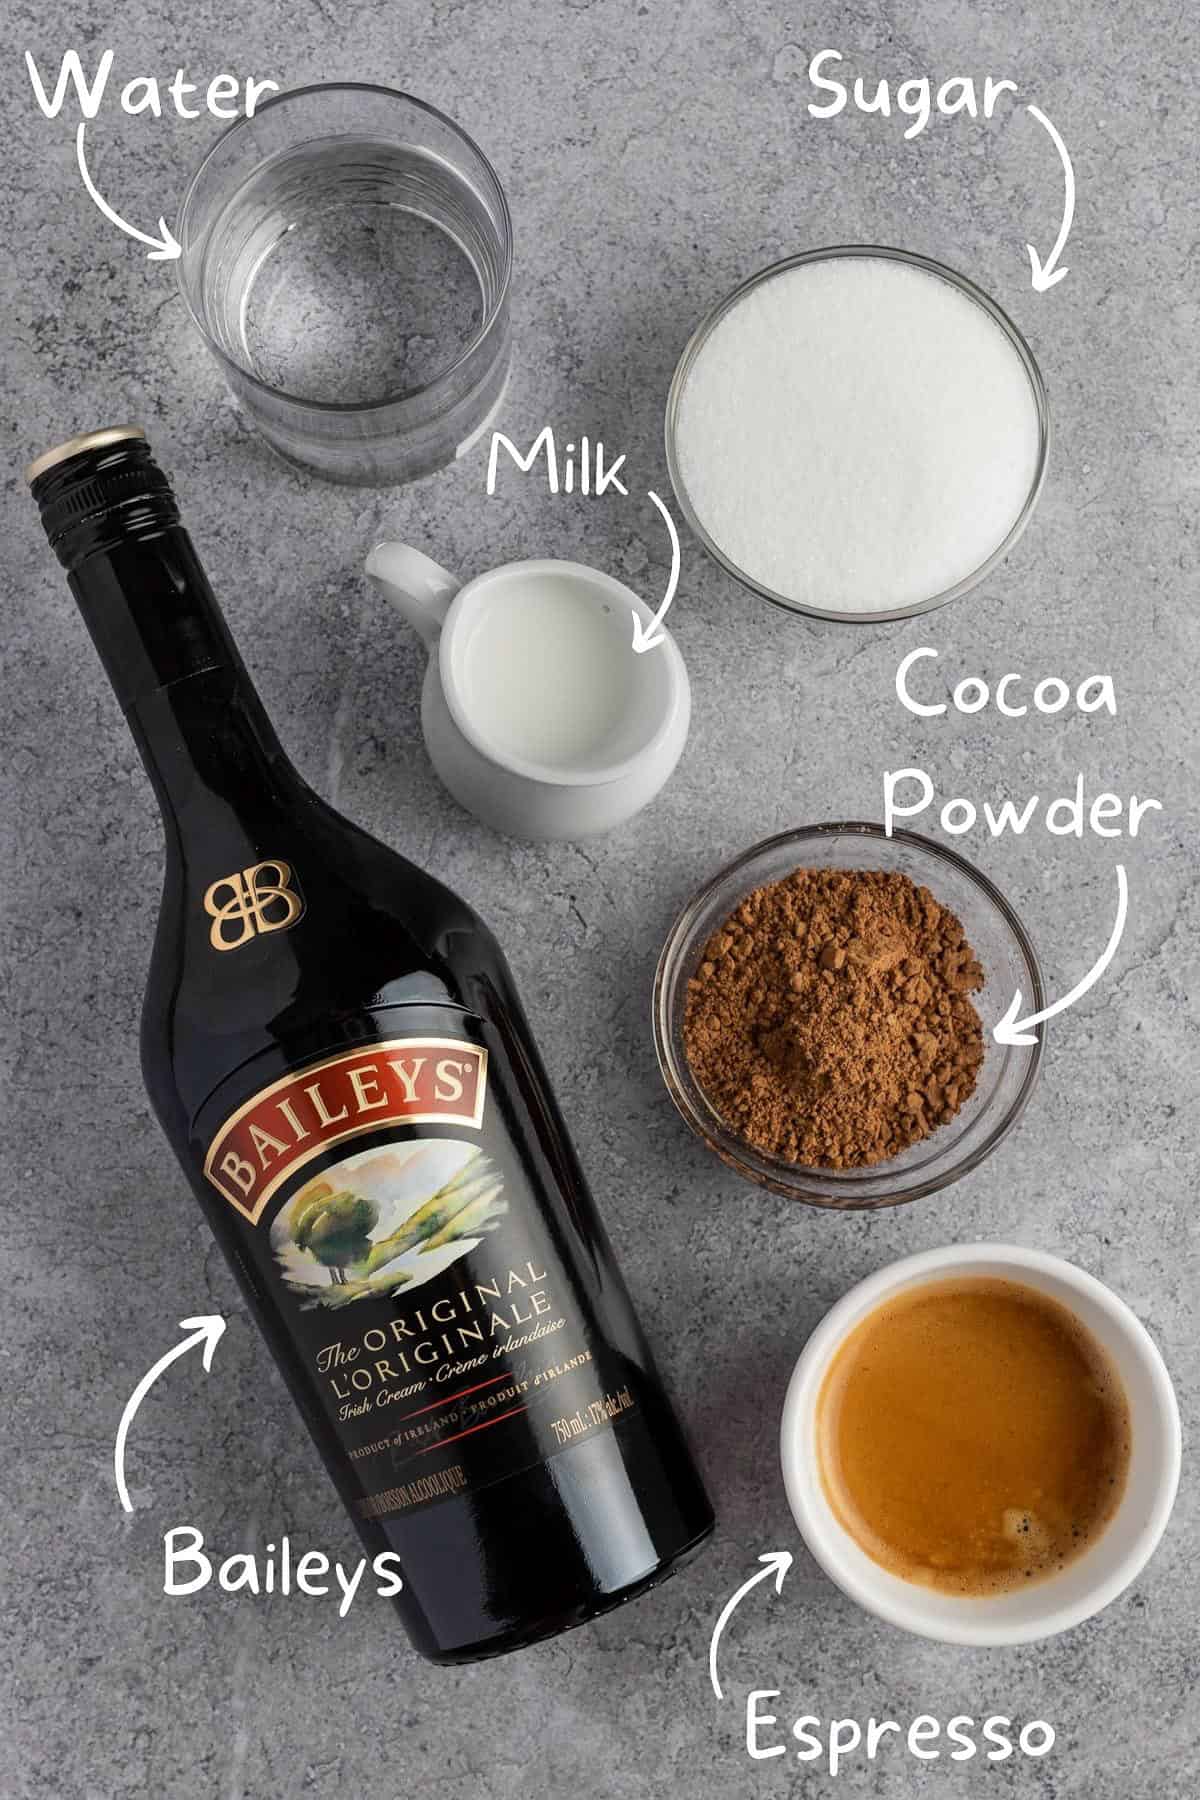 The ingredients needed to make baileys iced coffee.